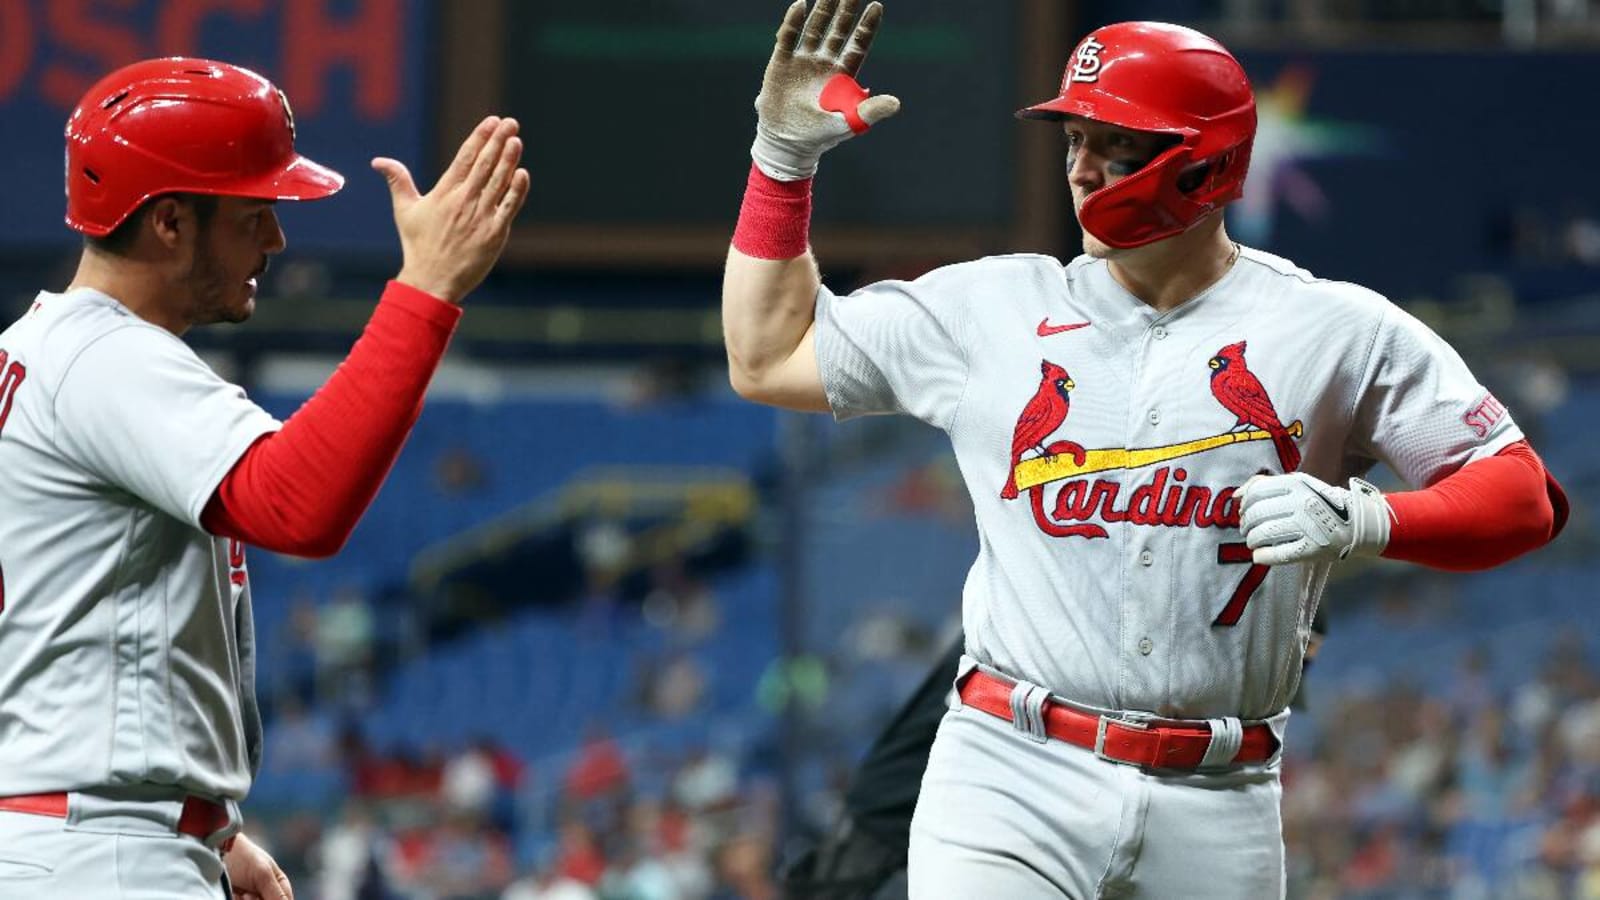 Cardinals Make Pair Of Surprising Cuts To Open Roster Spots; Could Big Move Be Coming?